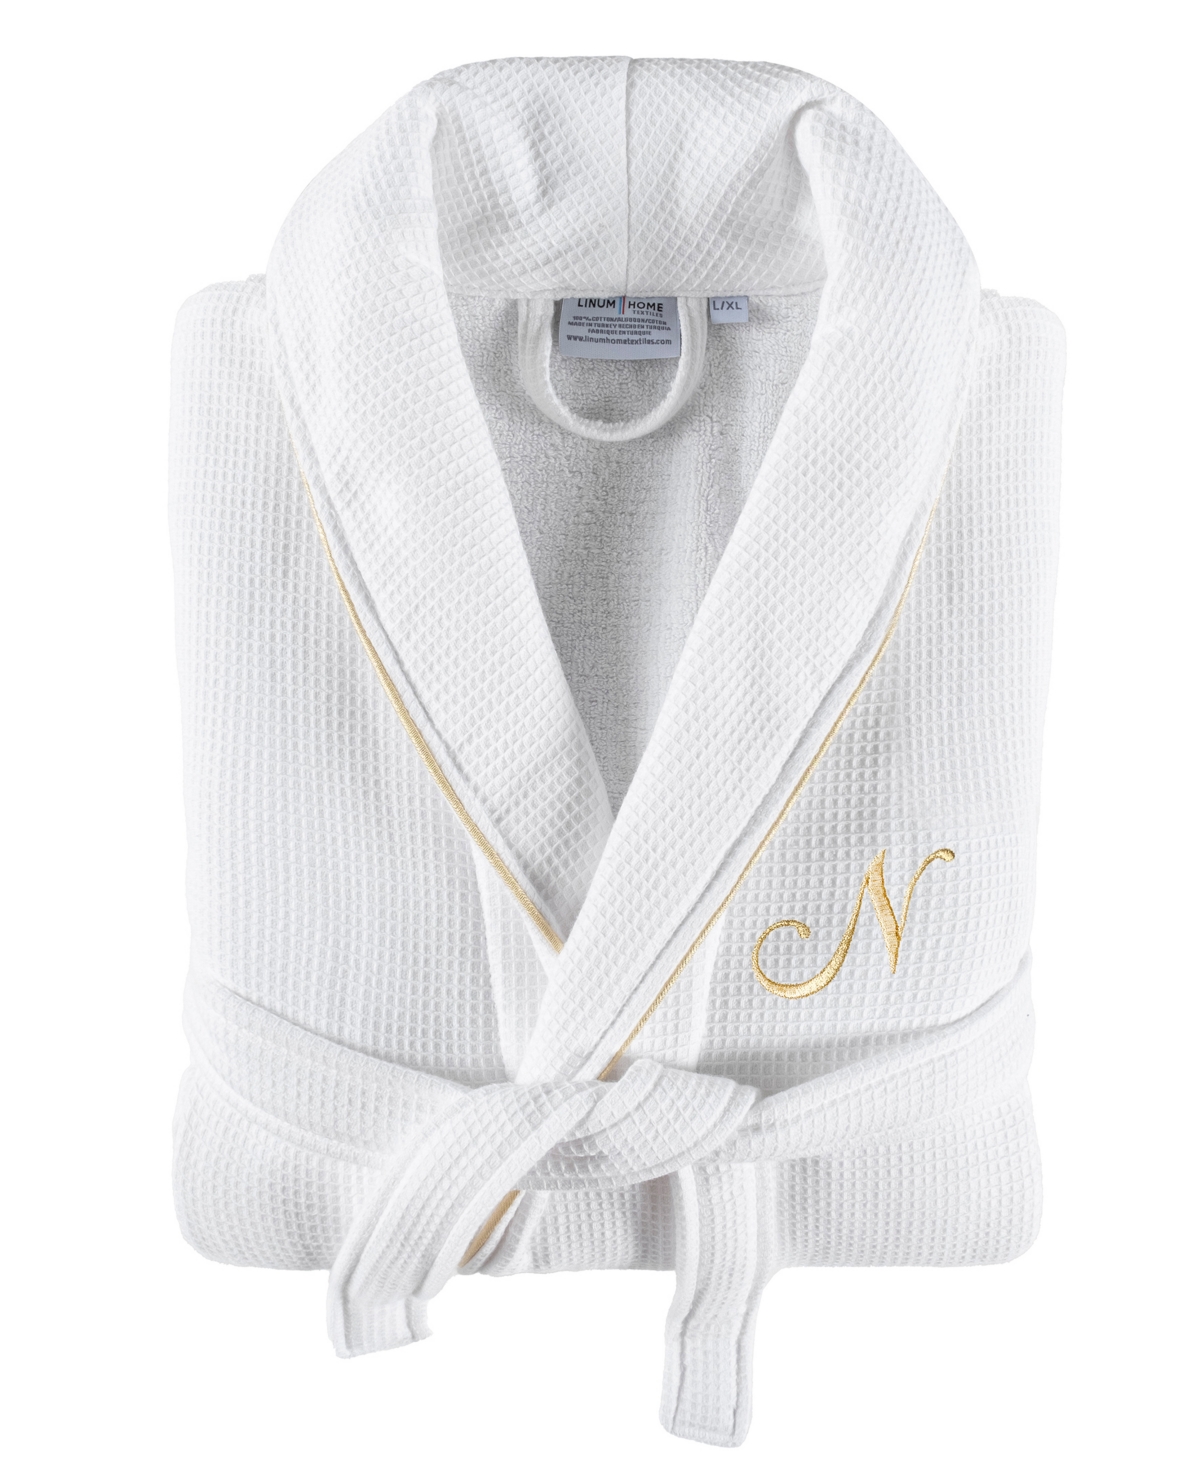 Shop Linum Home Textiles 100% Turkish Cotton Unisex Personalized Waffle Weave Terry Bathrobe With Satin Piped Trim In White N